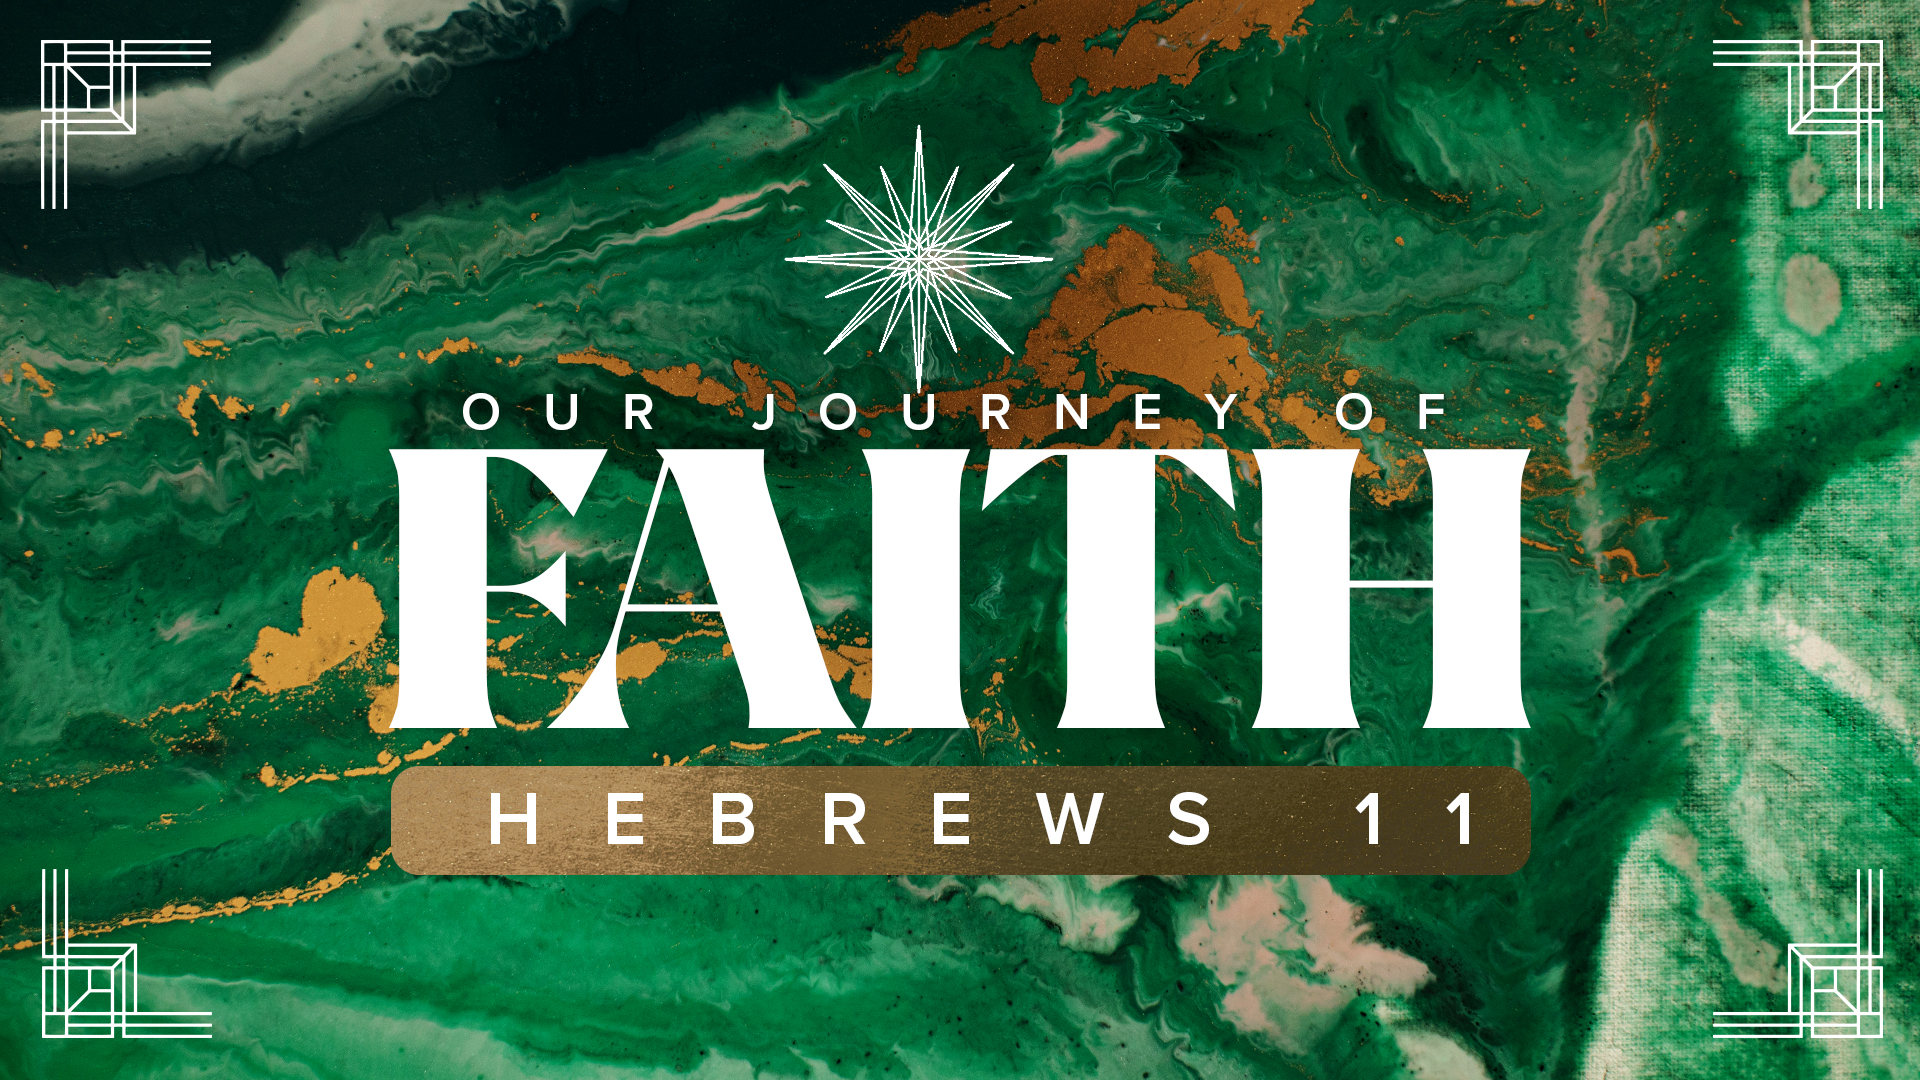 Hebrews 11:17-19 The Sacrifice of Letting Go (Hebrews 11: Our Journey of Faith) Image